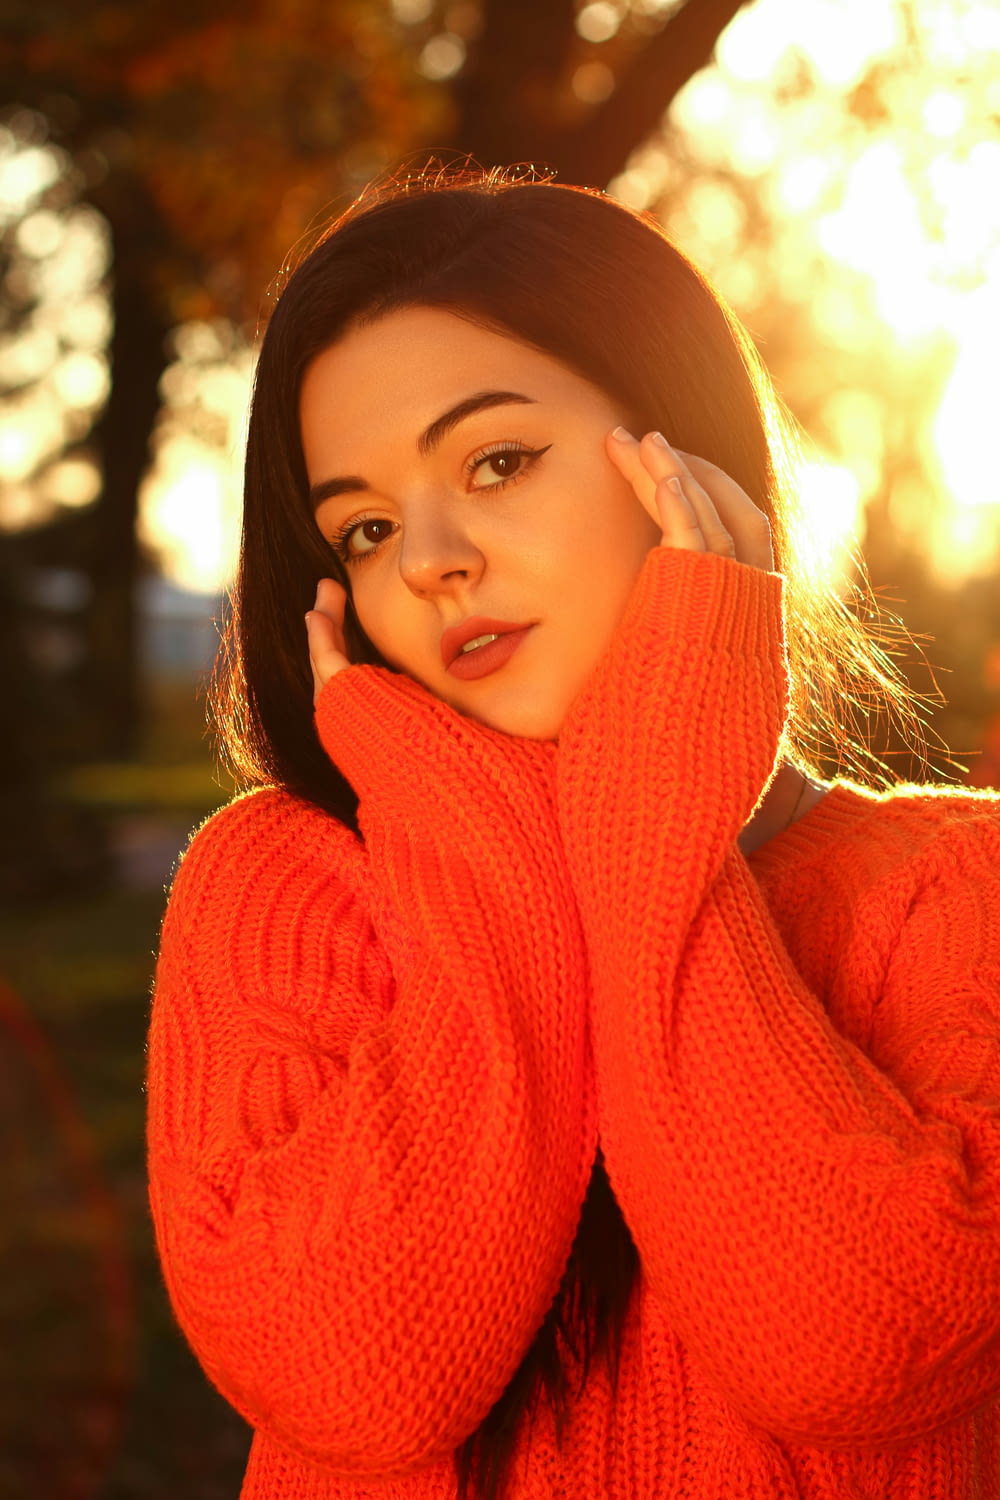 a woman in an orange sweater posing for a picture